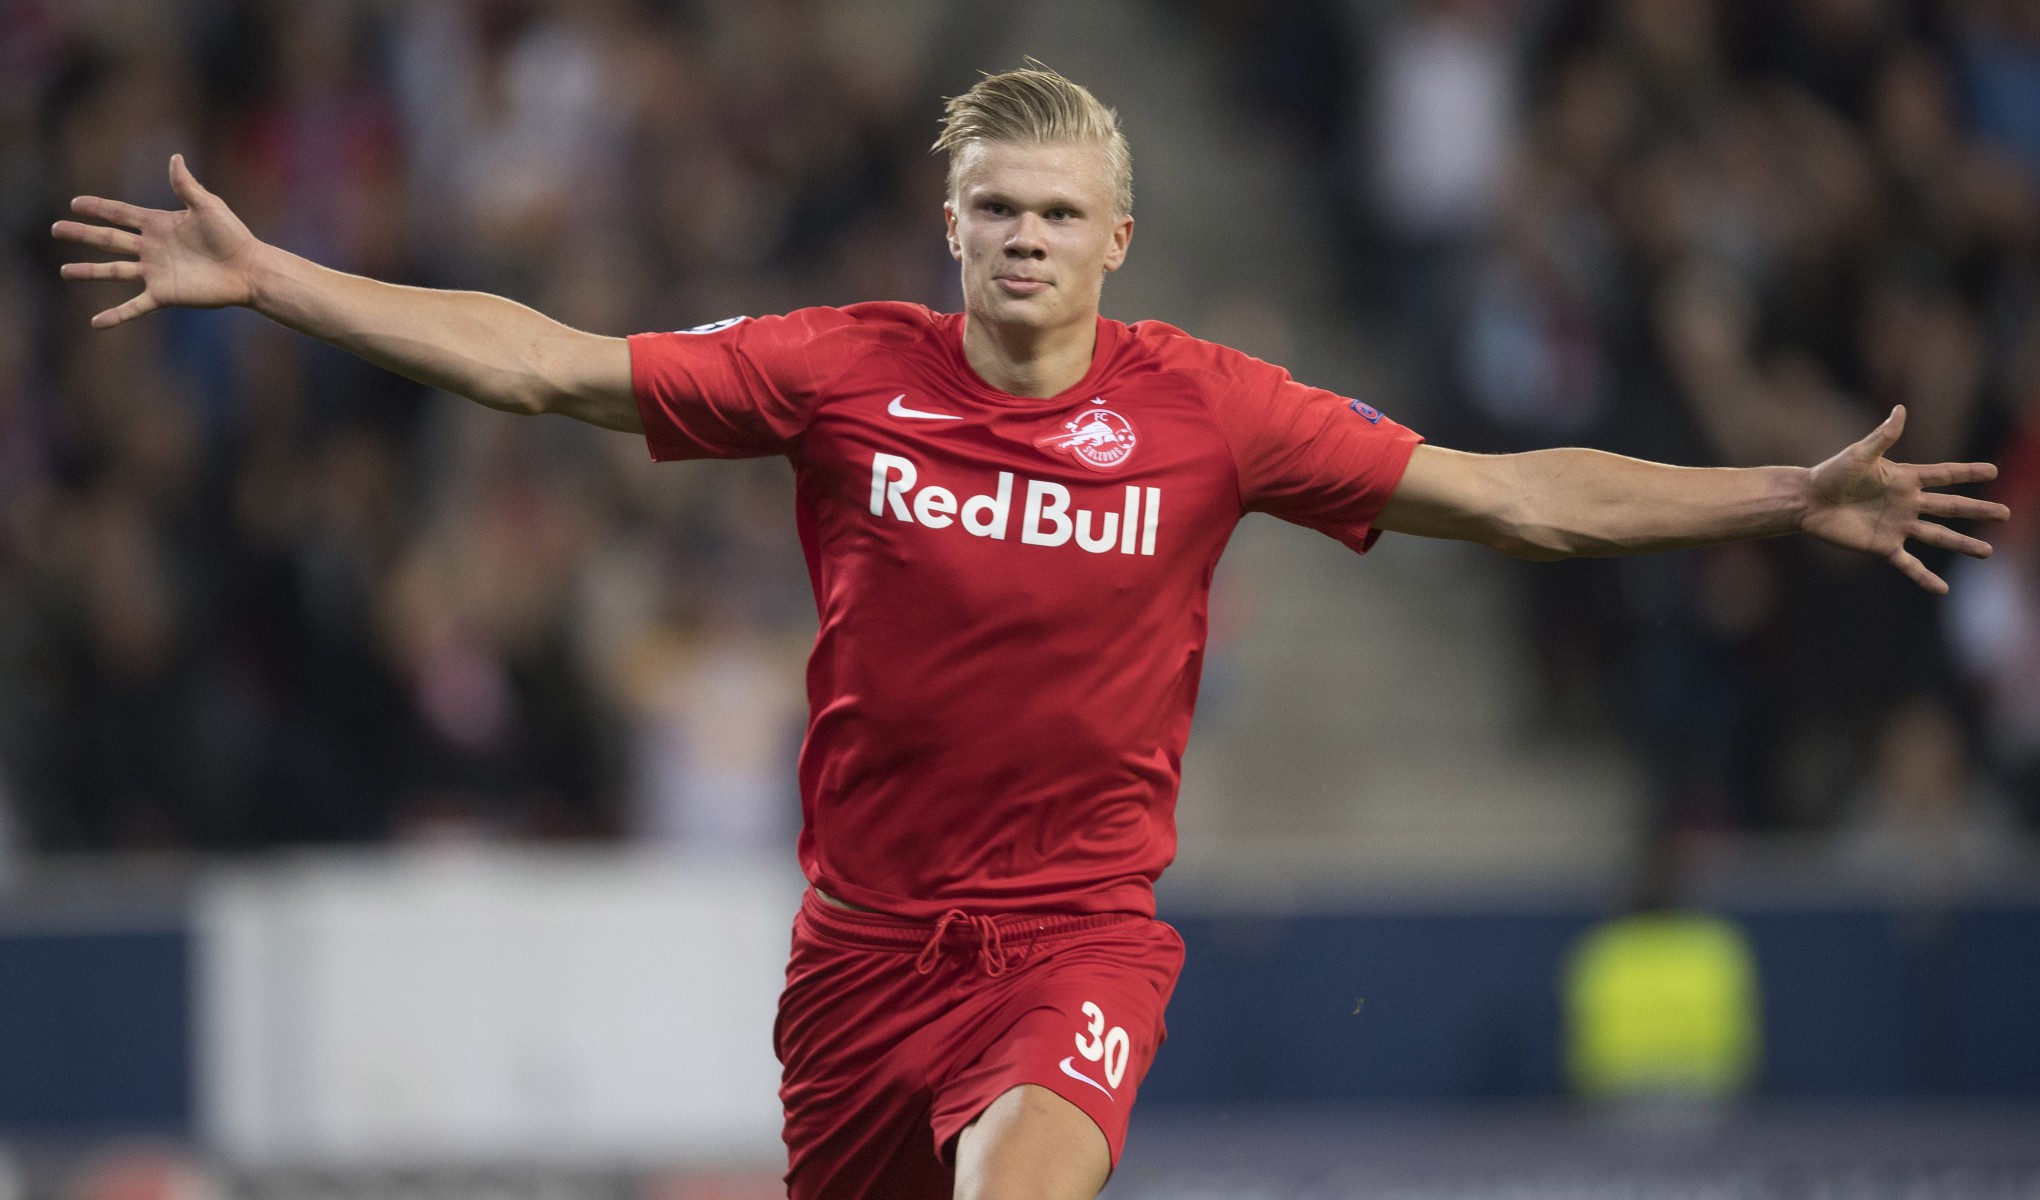 Erling Haaland is Europes most wanted striker